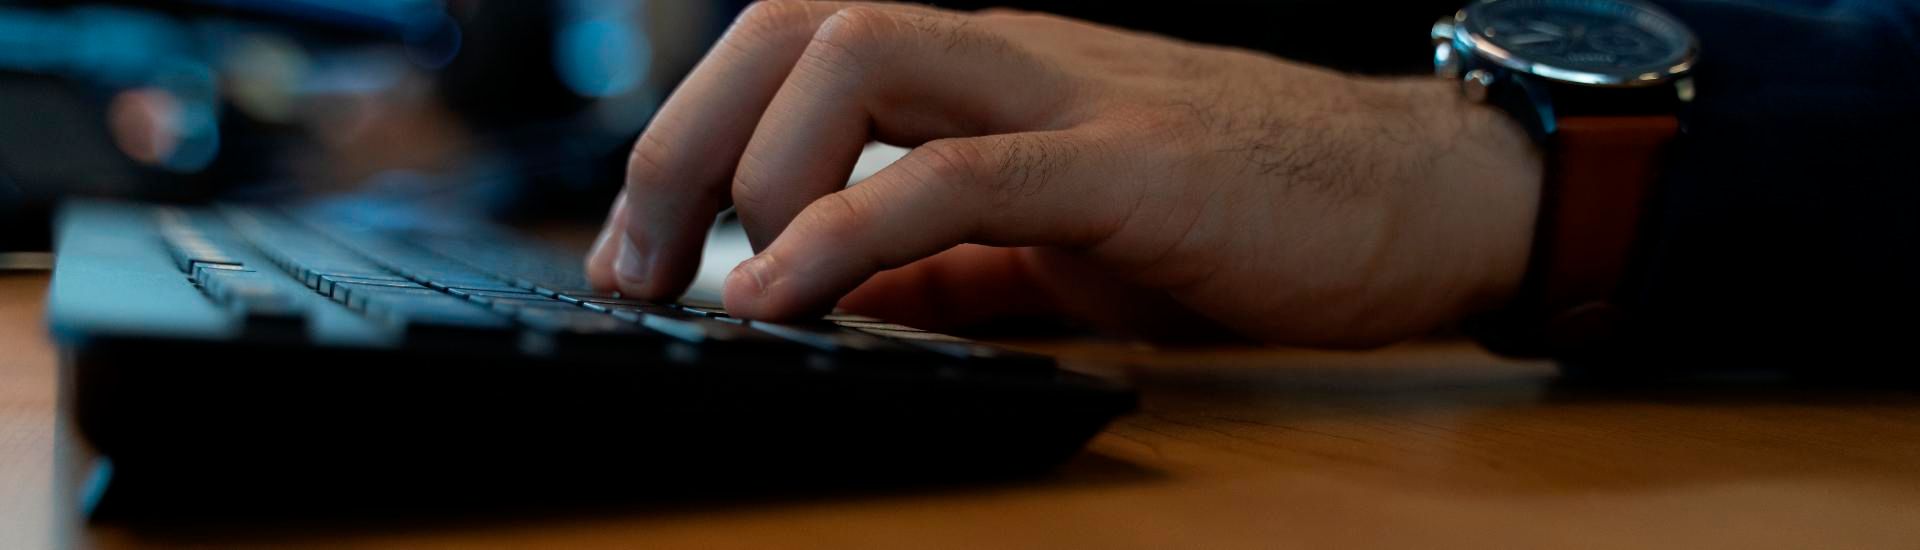 Image of hands on a keyboard